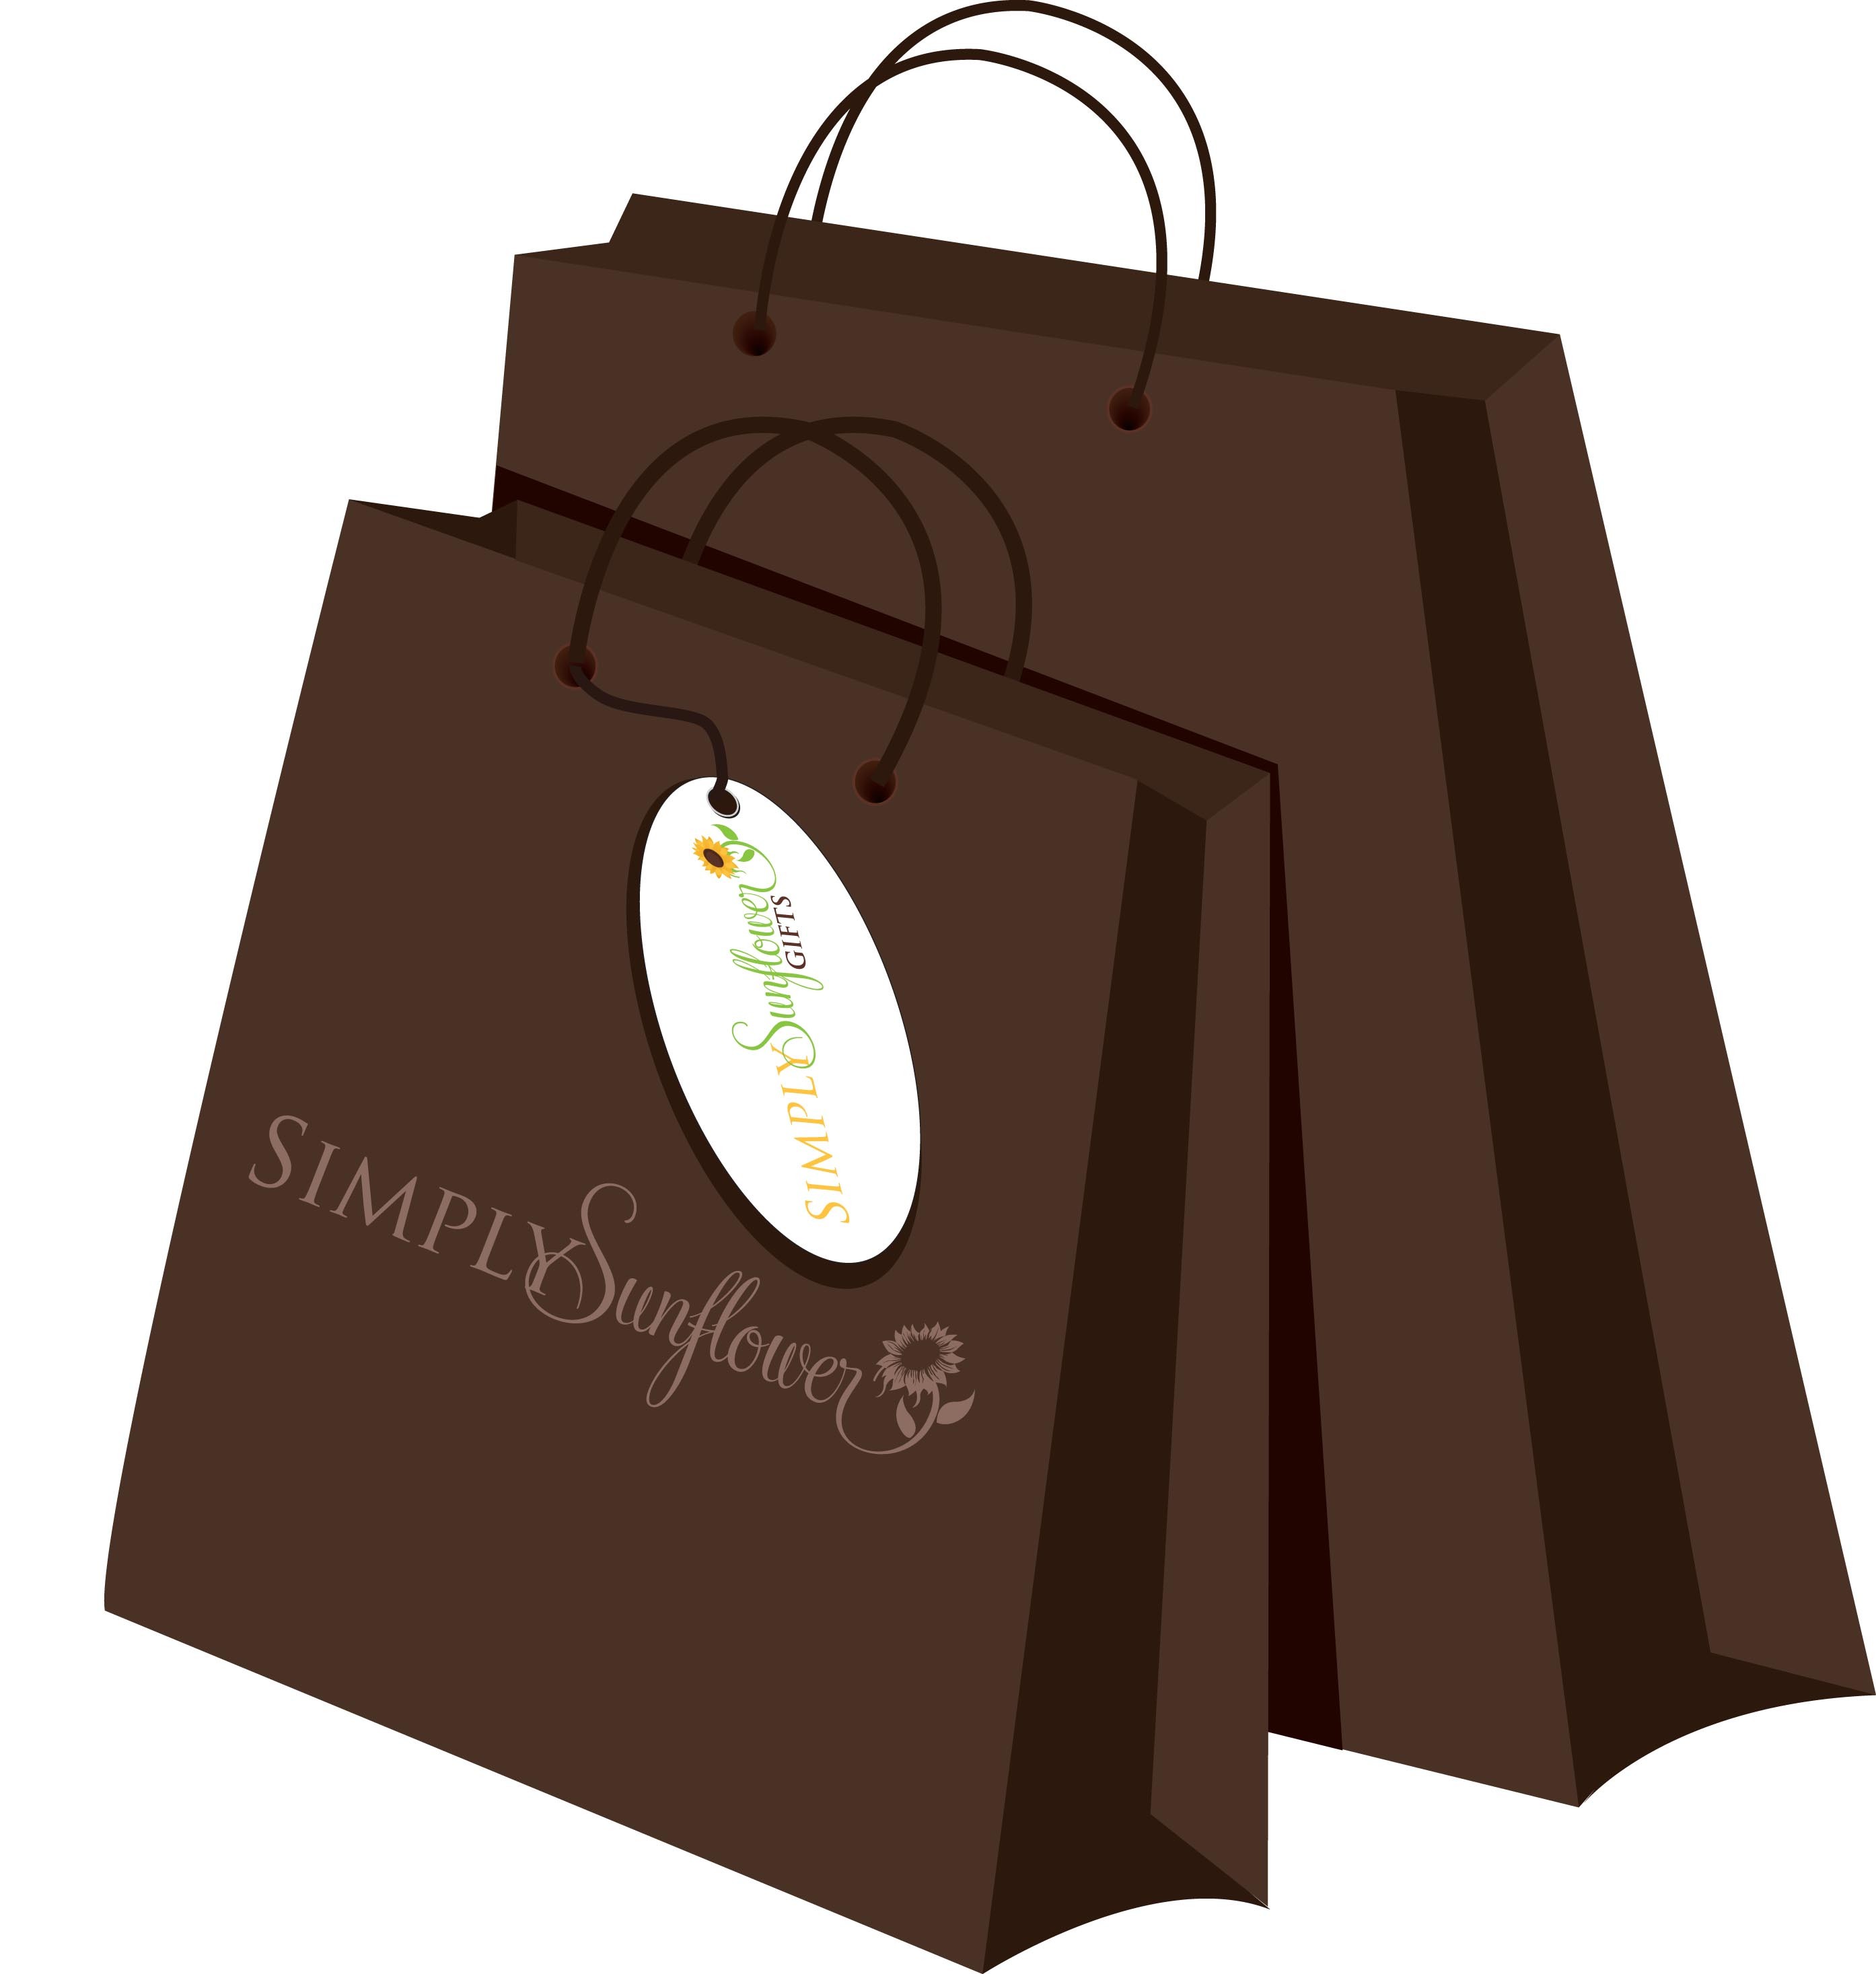 Attractive shopping bag designs | Best shopping bag design company